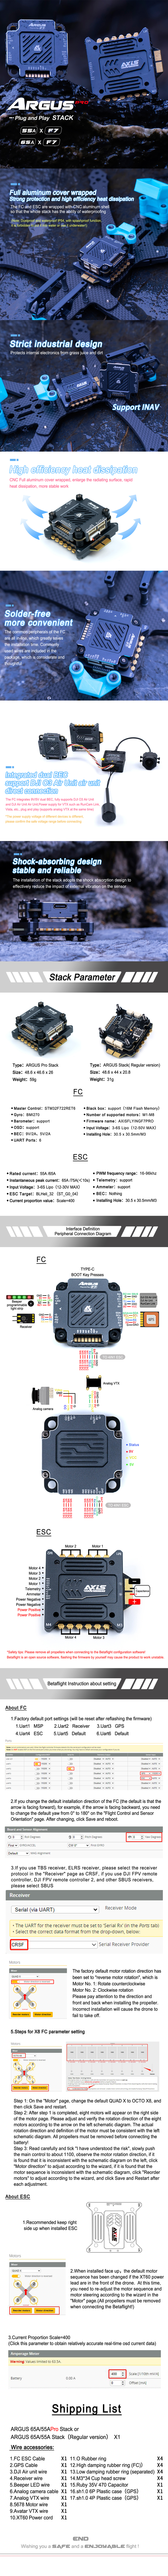 Axisflying Argus PRO Plug and Play STACK 55A/65A & F7  Plug and Play Stack  ESC,FC,stack,50A ESC,F722 FC,Bl-heli 32 bit,128khz,Plug&Play,Plug and Play